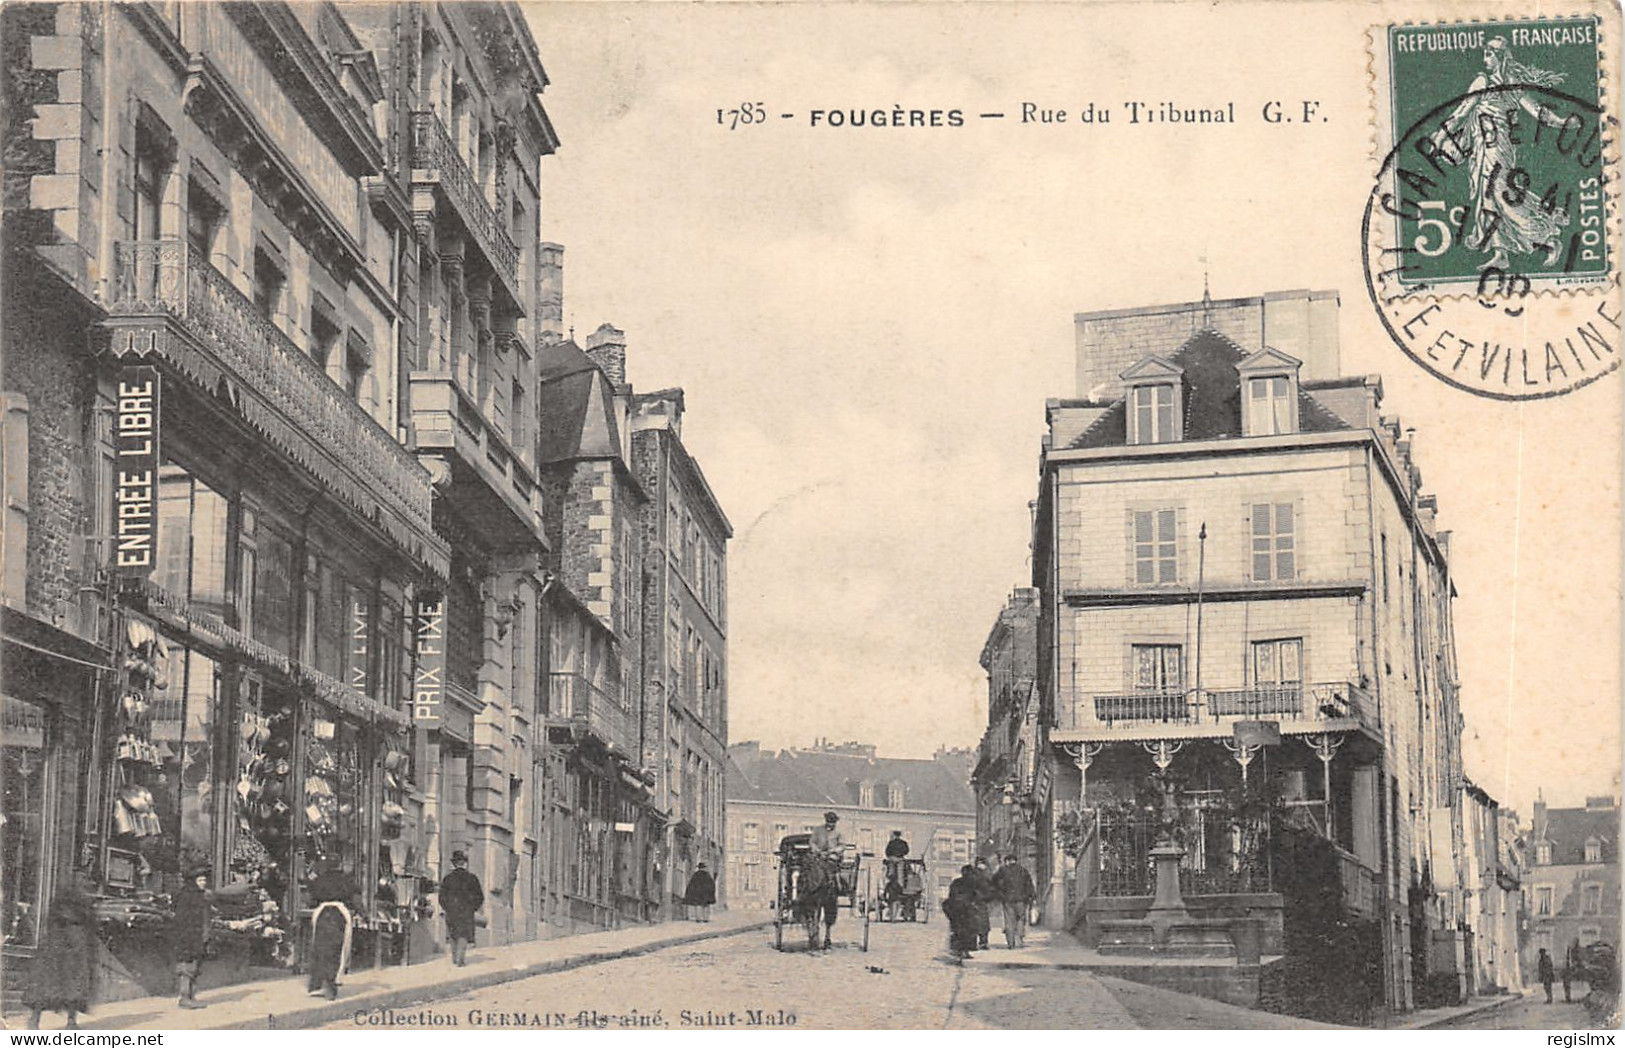 35-FOUGERES-N°2153-E/0293 - Fougeres